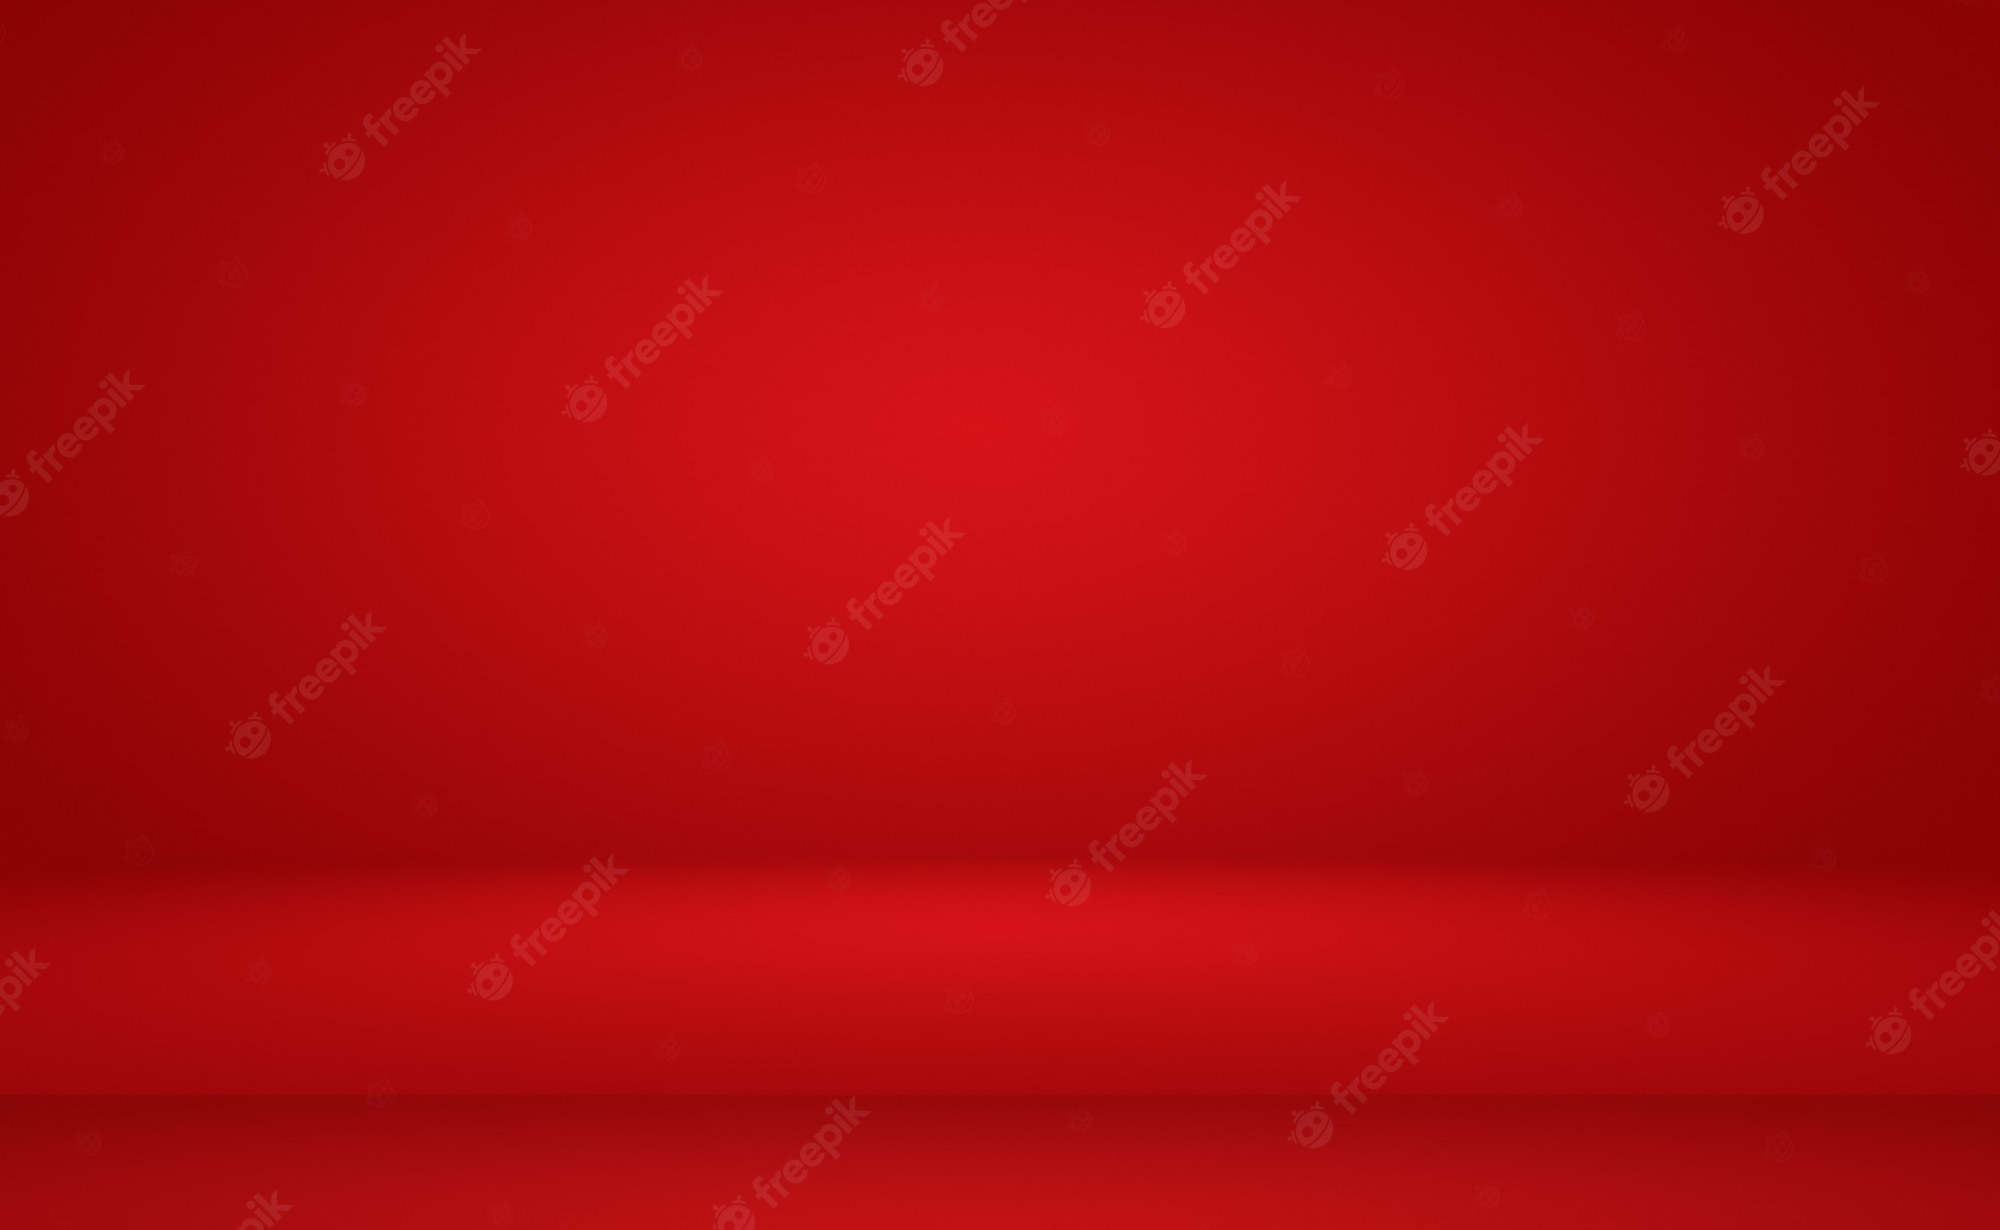 Plain Red Background